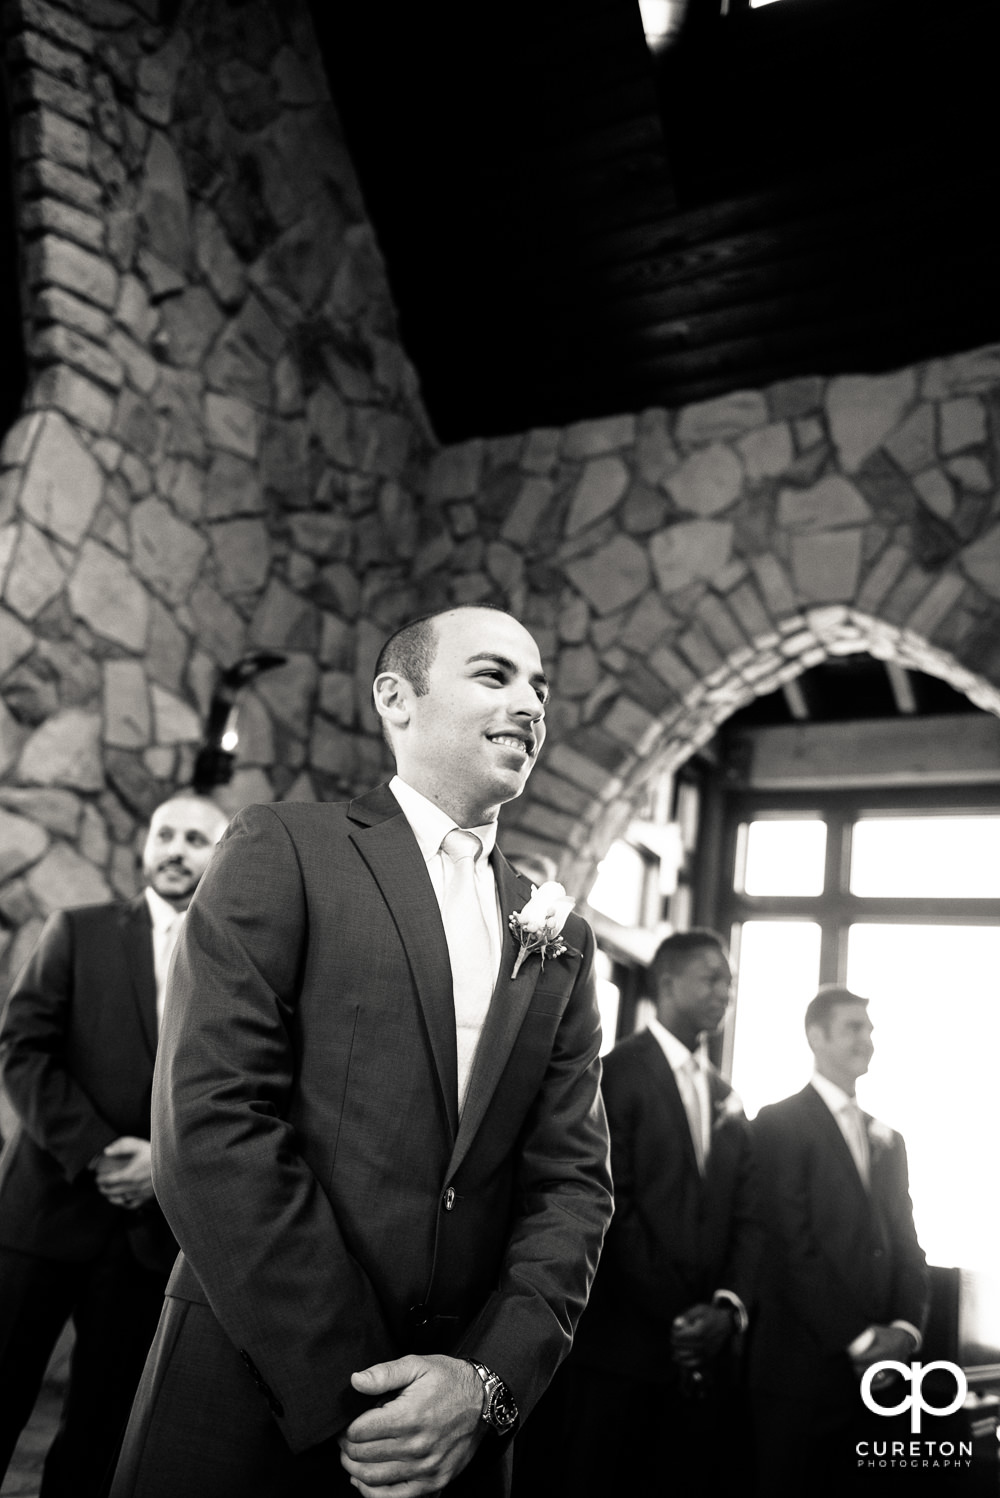 Groom sees his bride for the first time walking down the at the wedding.